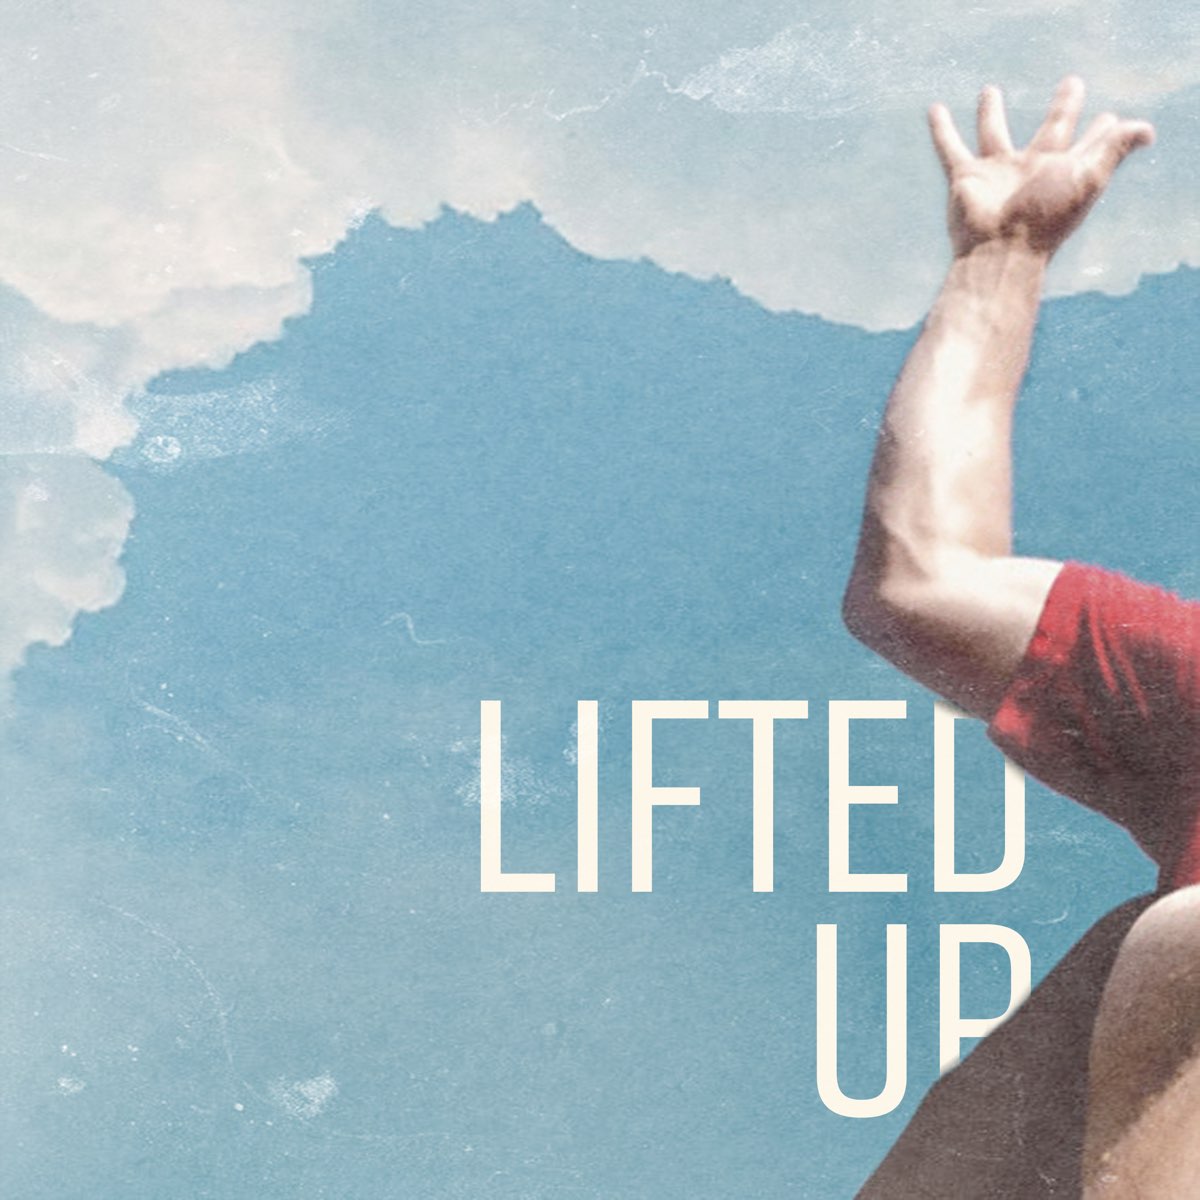 Lift up. Lifted Music.